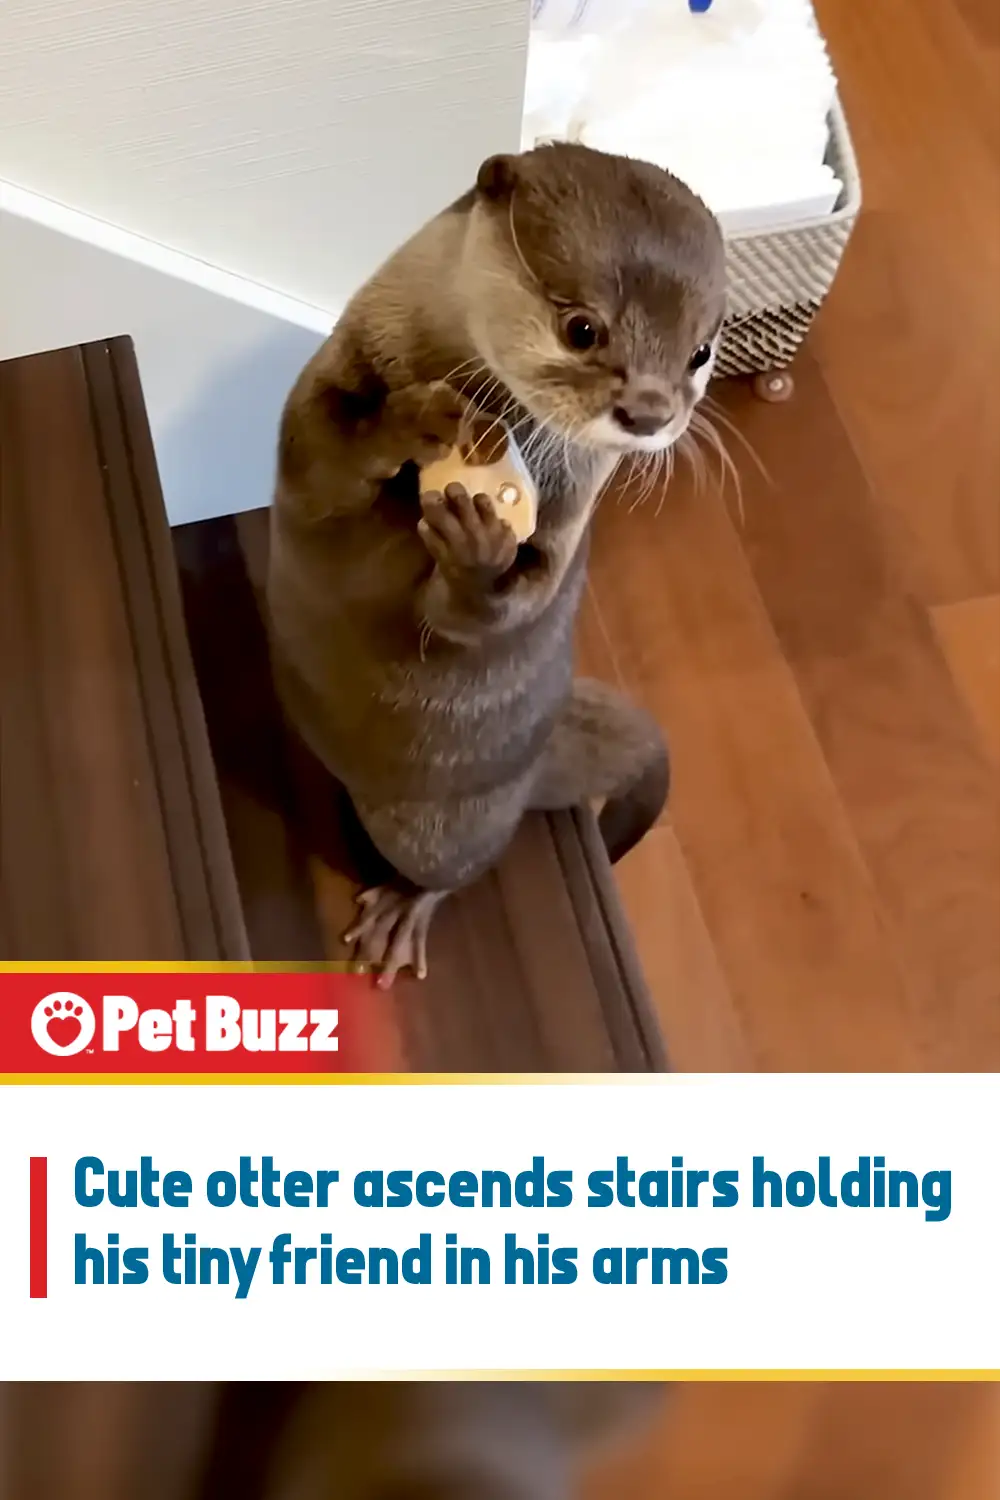 Cute otter ascends stairs holding his tiny friend in his arms